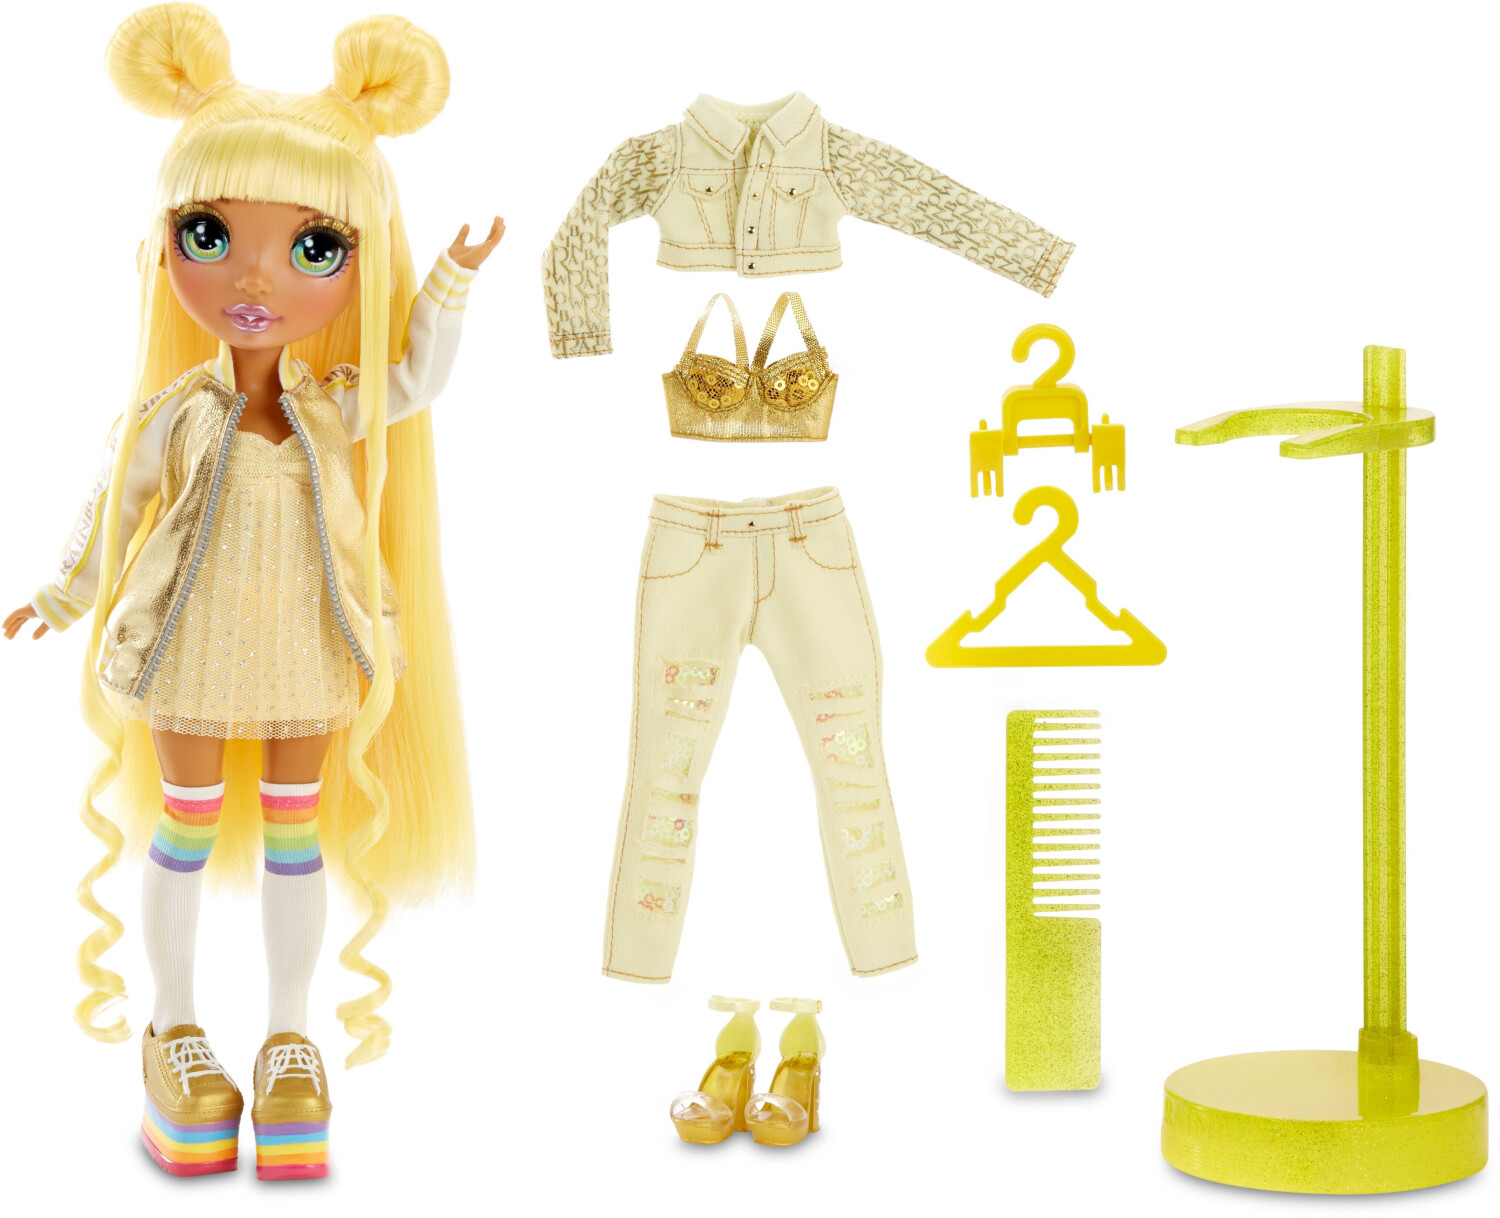 Buy Mga Entertainment Rainbow Surprise Fashion Doll From £2149 Today Best Deals On Uk 